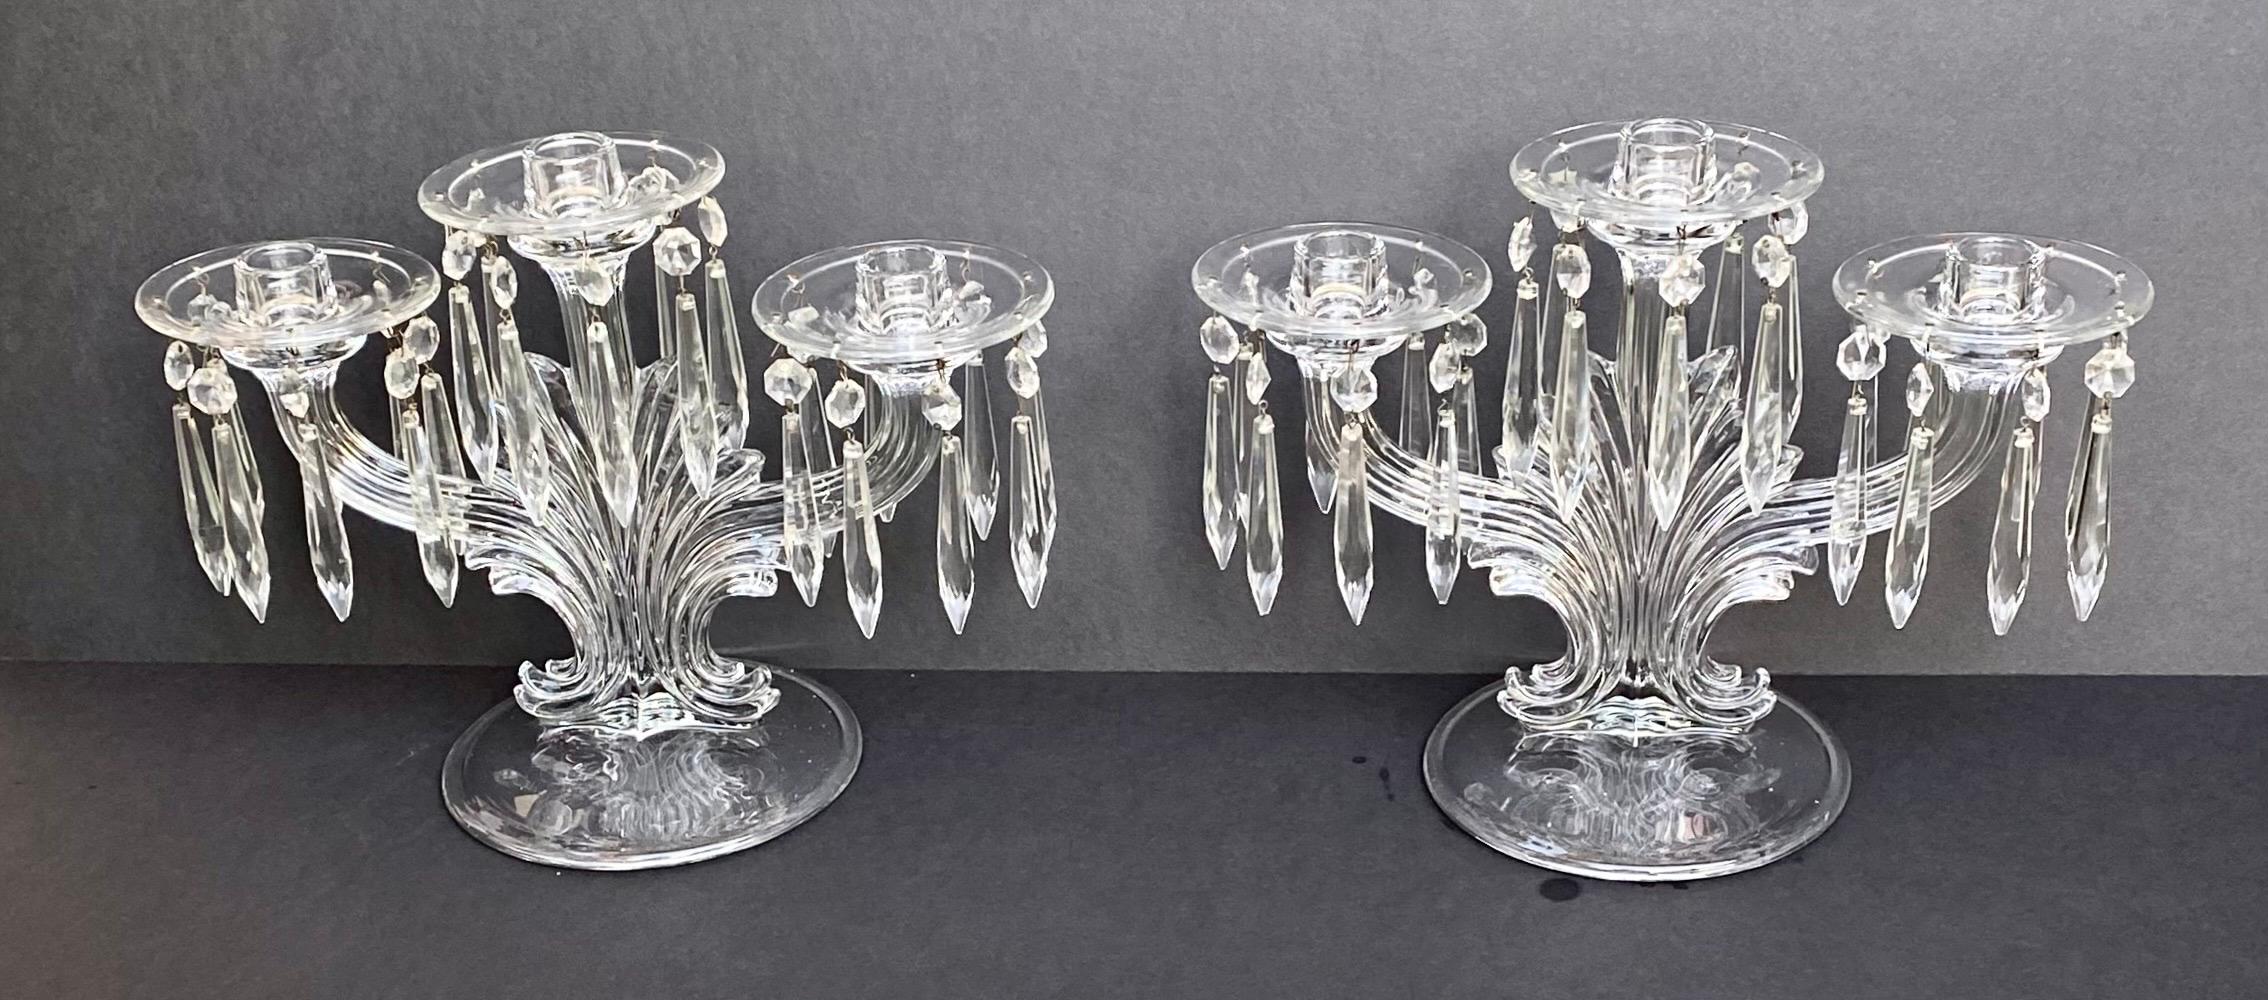 Pair of American Pressed Glass Three Light Candelabra, Early 20th C., on Swirled For Sale 2